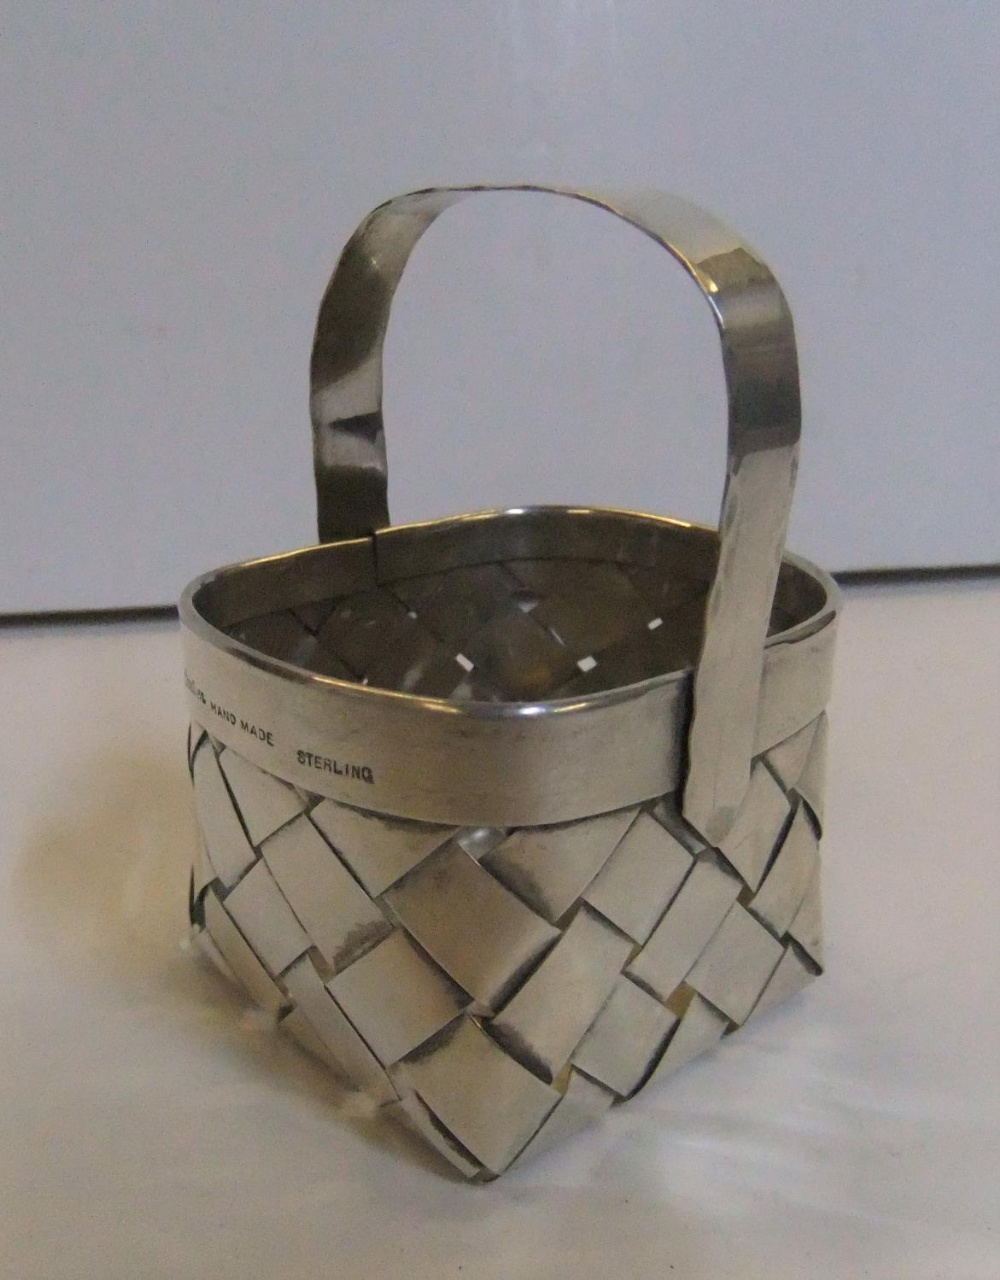 Charming miniature silver basket by Cartier, 6 cm long - Image 4 of 5